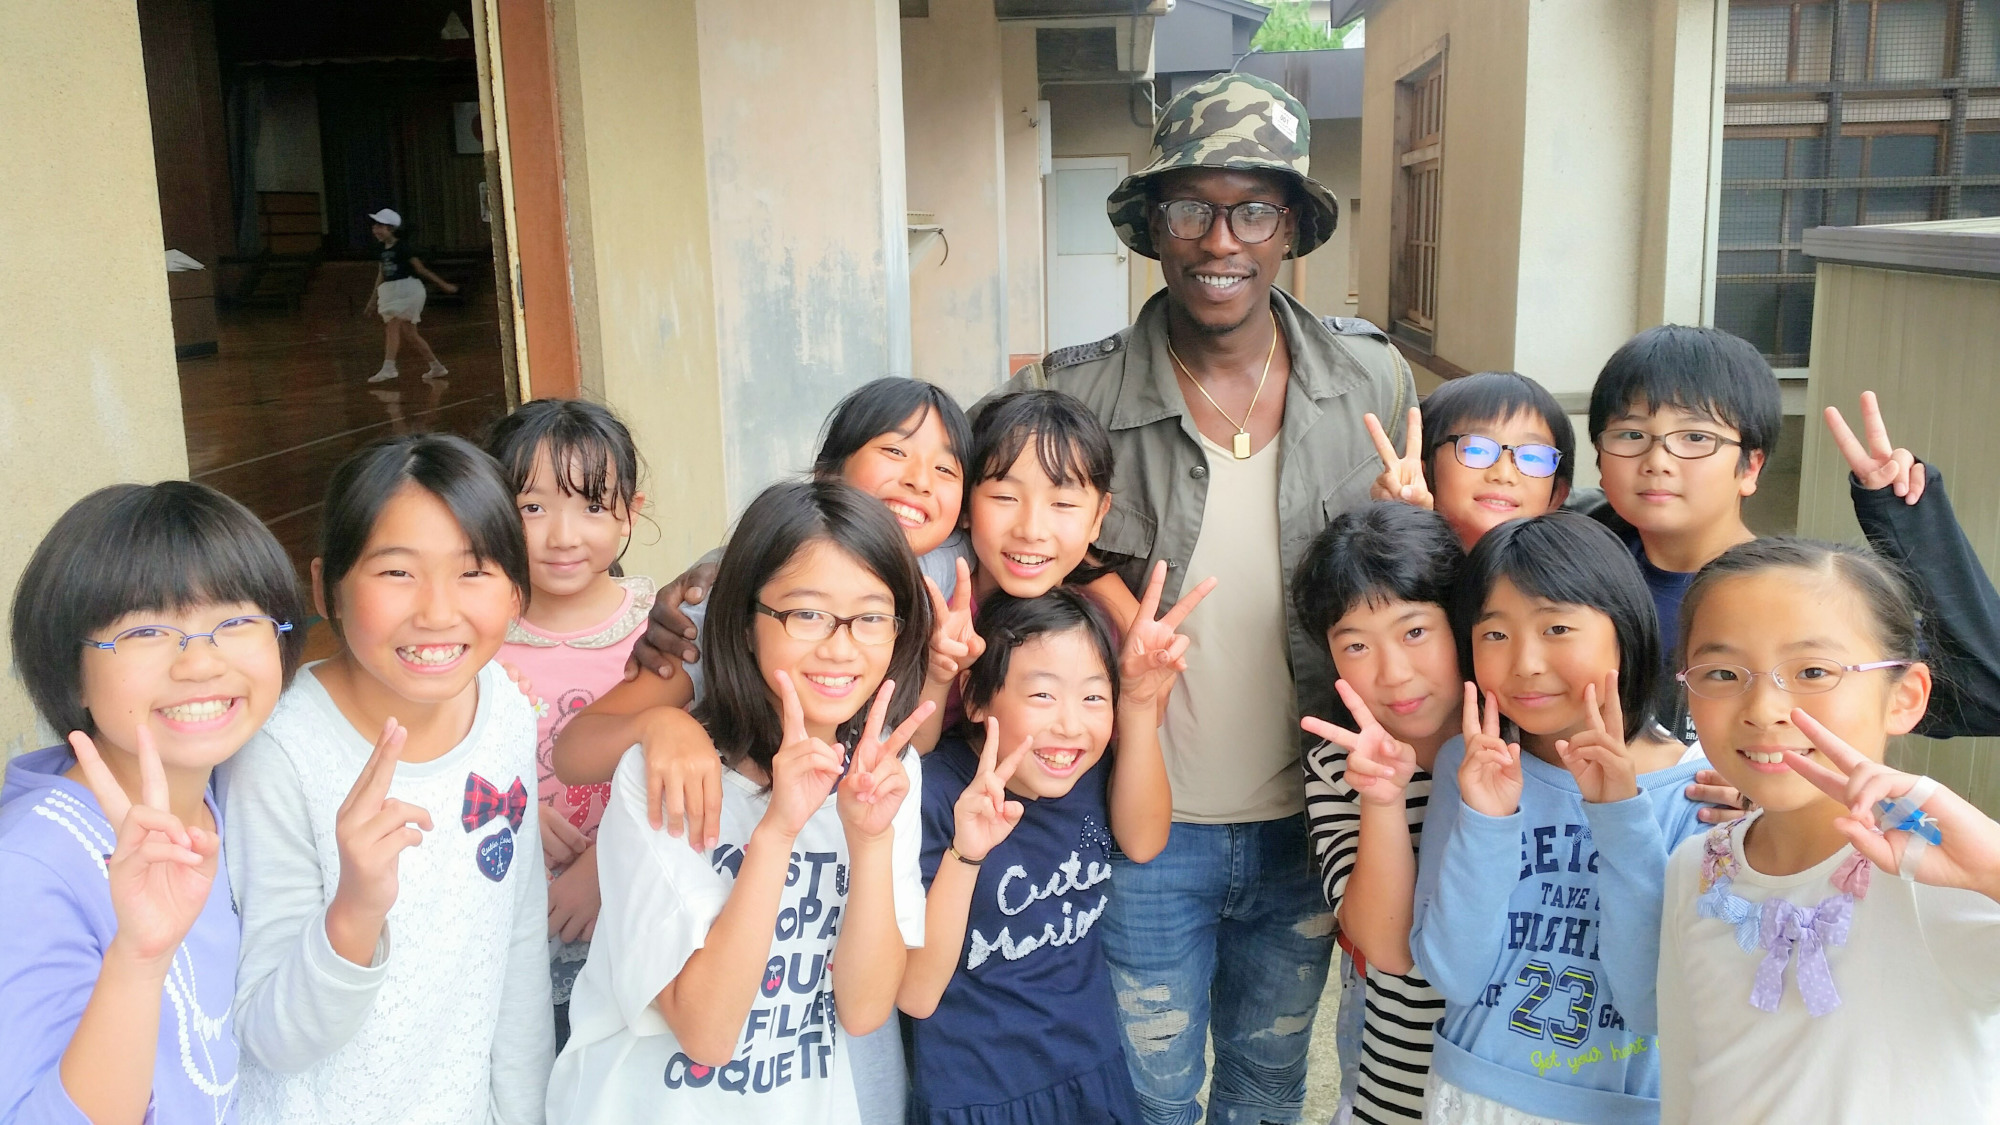 Expanding horizons: Abdou Baye Fall poses with schoolchildren in Fukushima during a visit to the city last month. | COURTESY OF ABDOU BAYE FALL